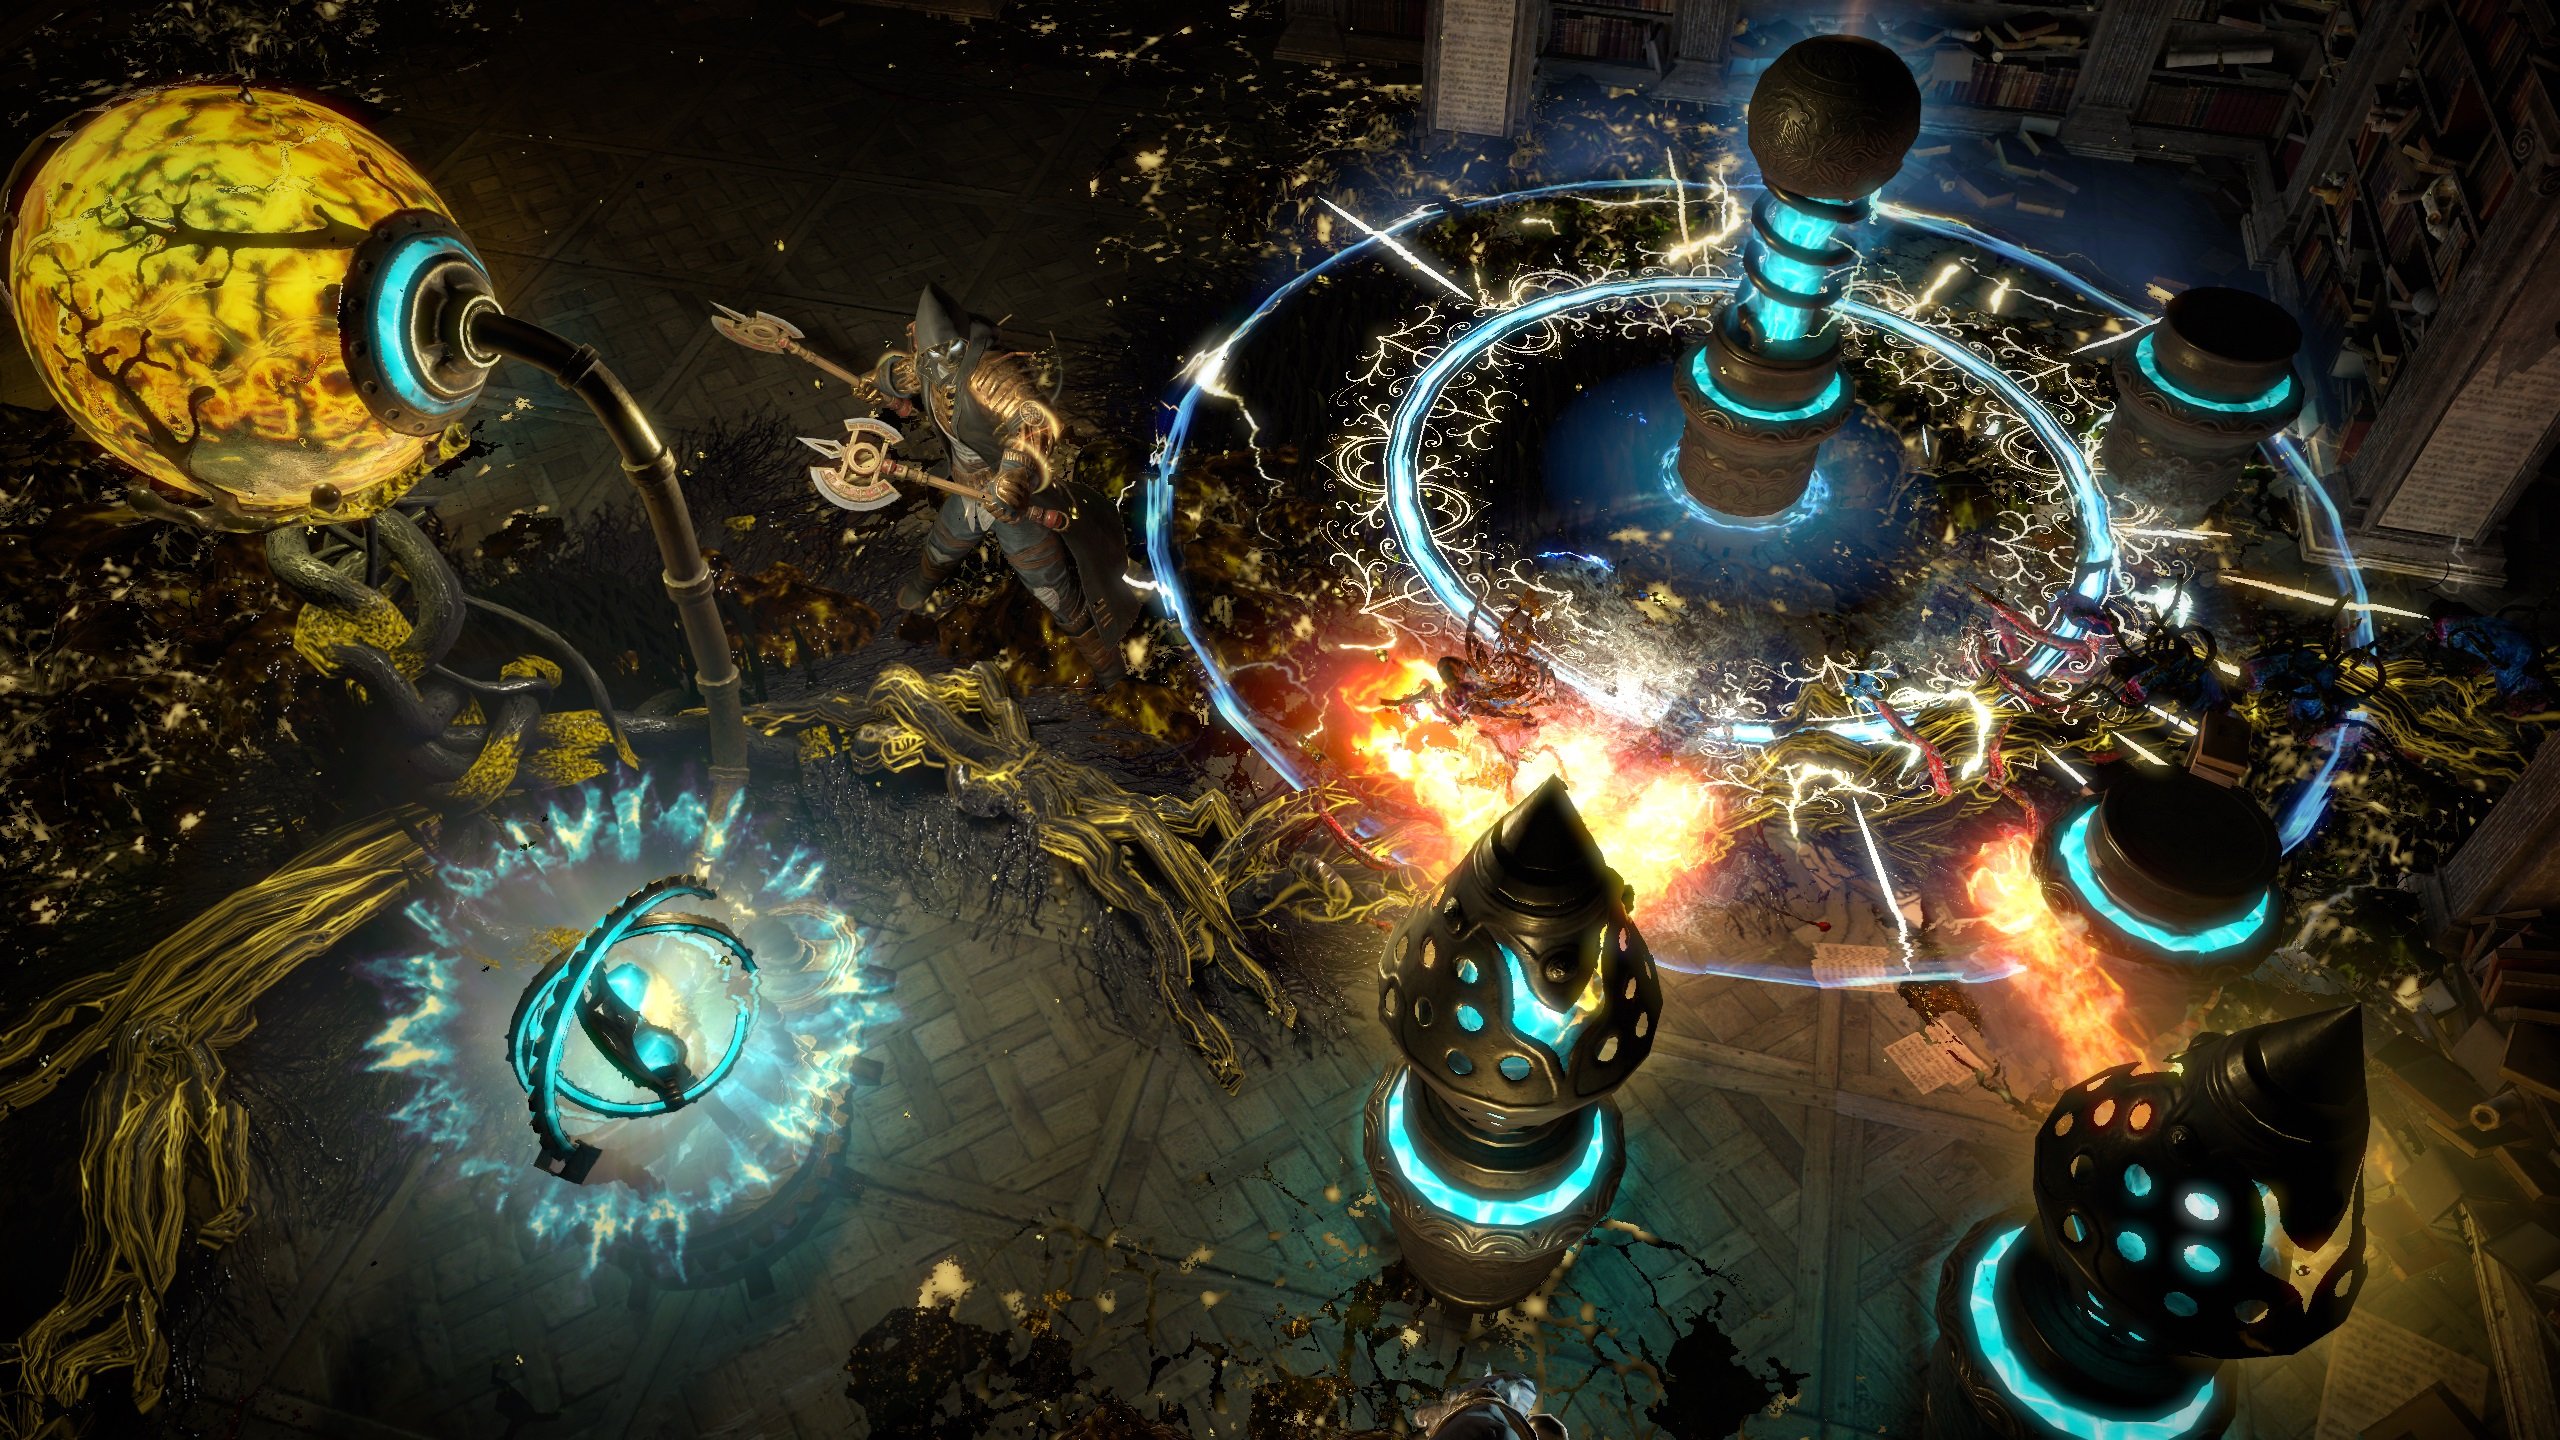 Path Of Exile: Blight Is Launching On September 9, Update Brings A New Challenge League And Powerful Items To Help Shake Up Path Of Exile’s Meta